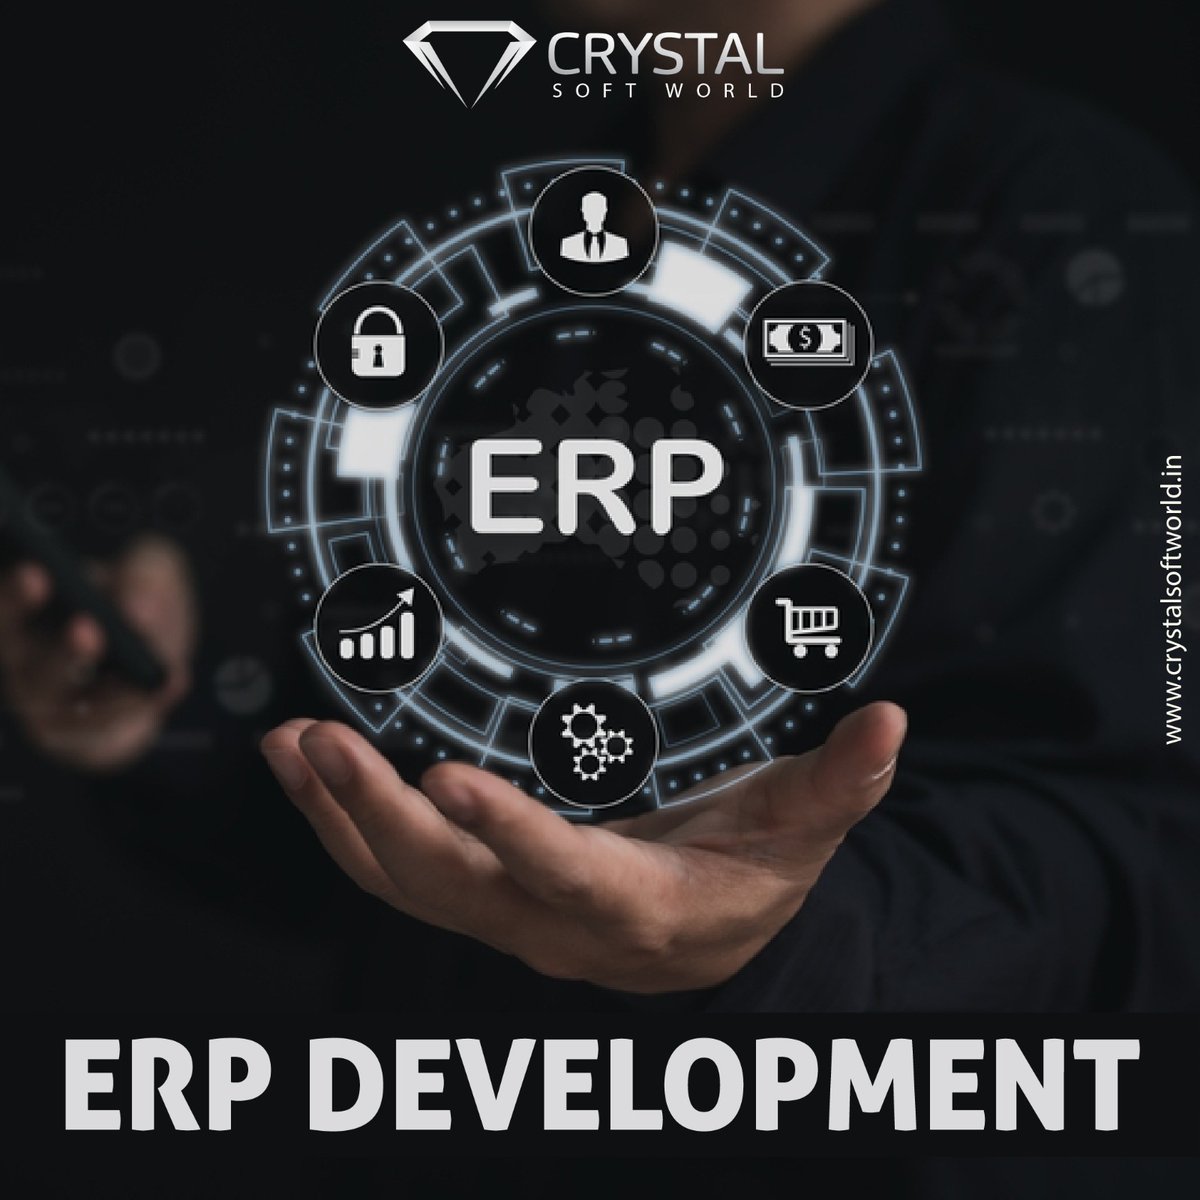 Empower your business with customized ERP solutions tailored to your unique needs! Our expert team specializes in crafting cutting-edge ERP systems that streamline operations, boost efficiency, and drive growth. 📷📷
.
.
#crystalsoftworld #ERPDevelopment #BusinessOptimization